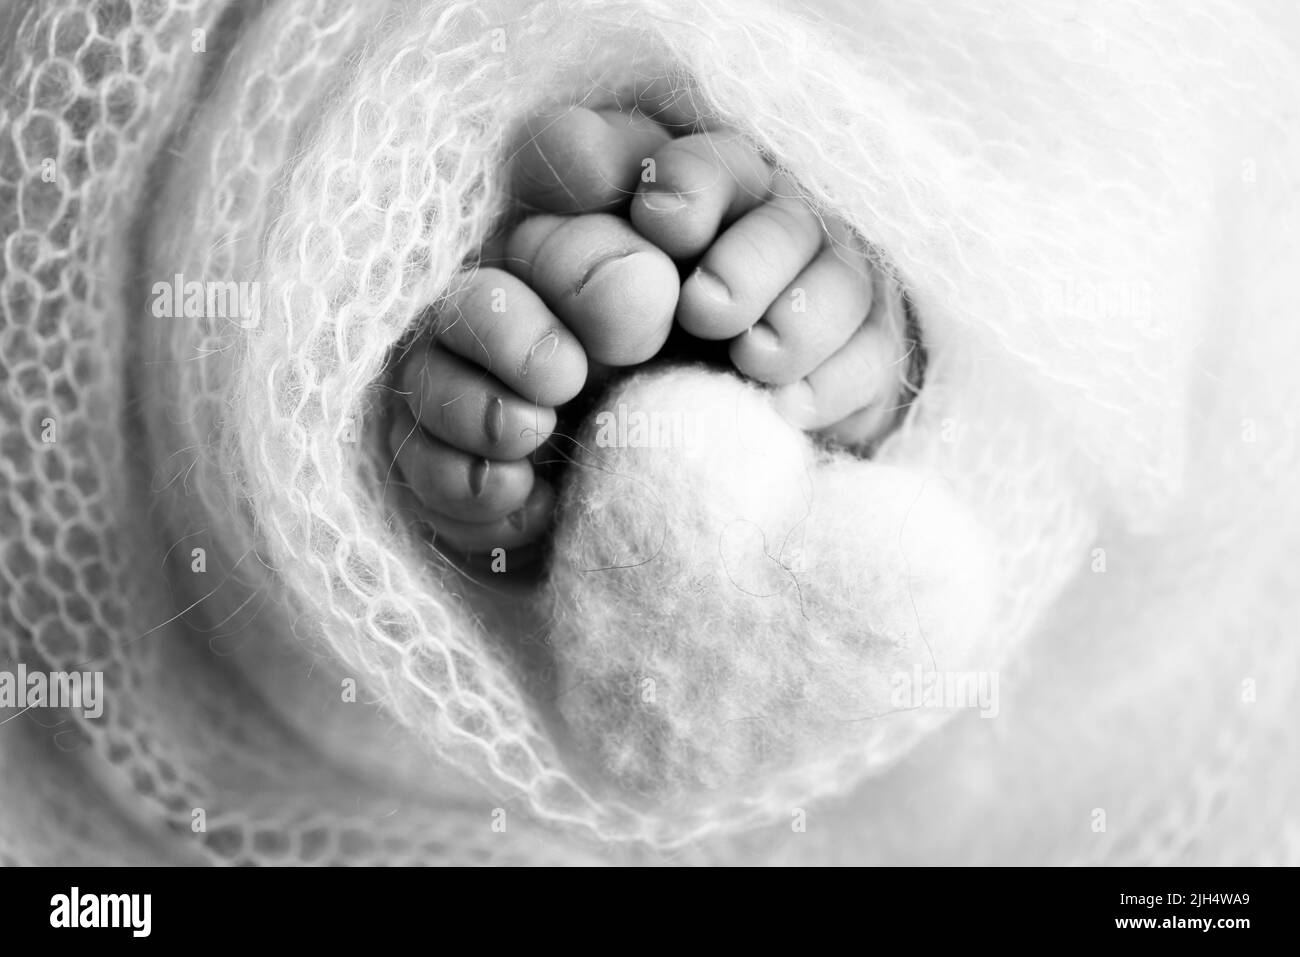 The tiny foot of a newborn baby. Soft feet of a new born in a wool blanket. Knitted heart in the legs of baby.  Stock Photo